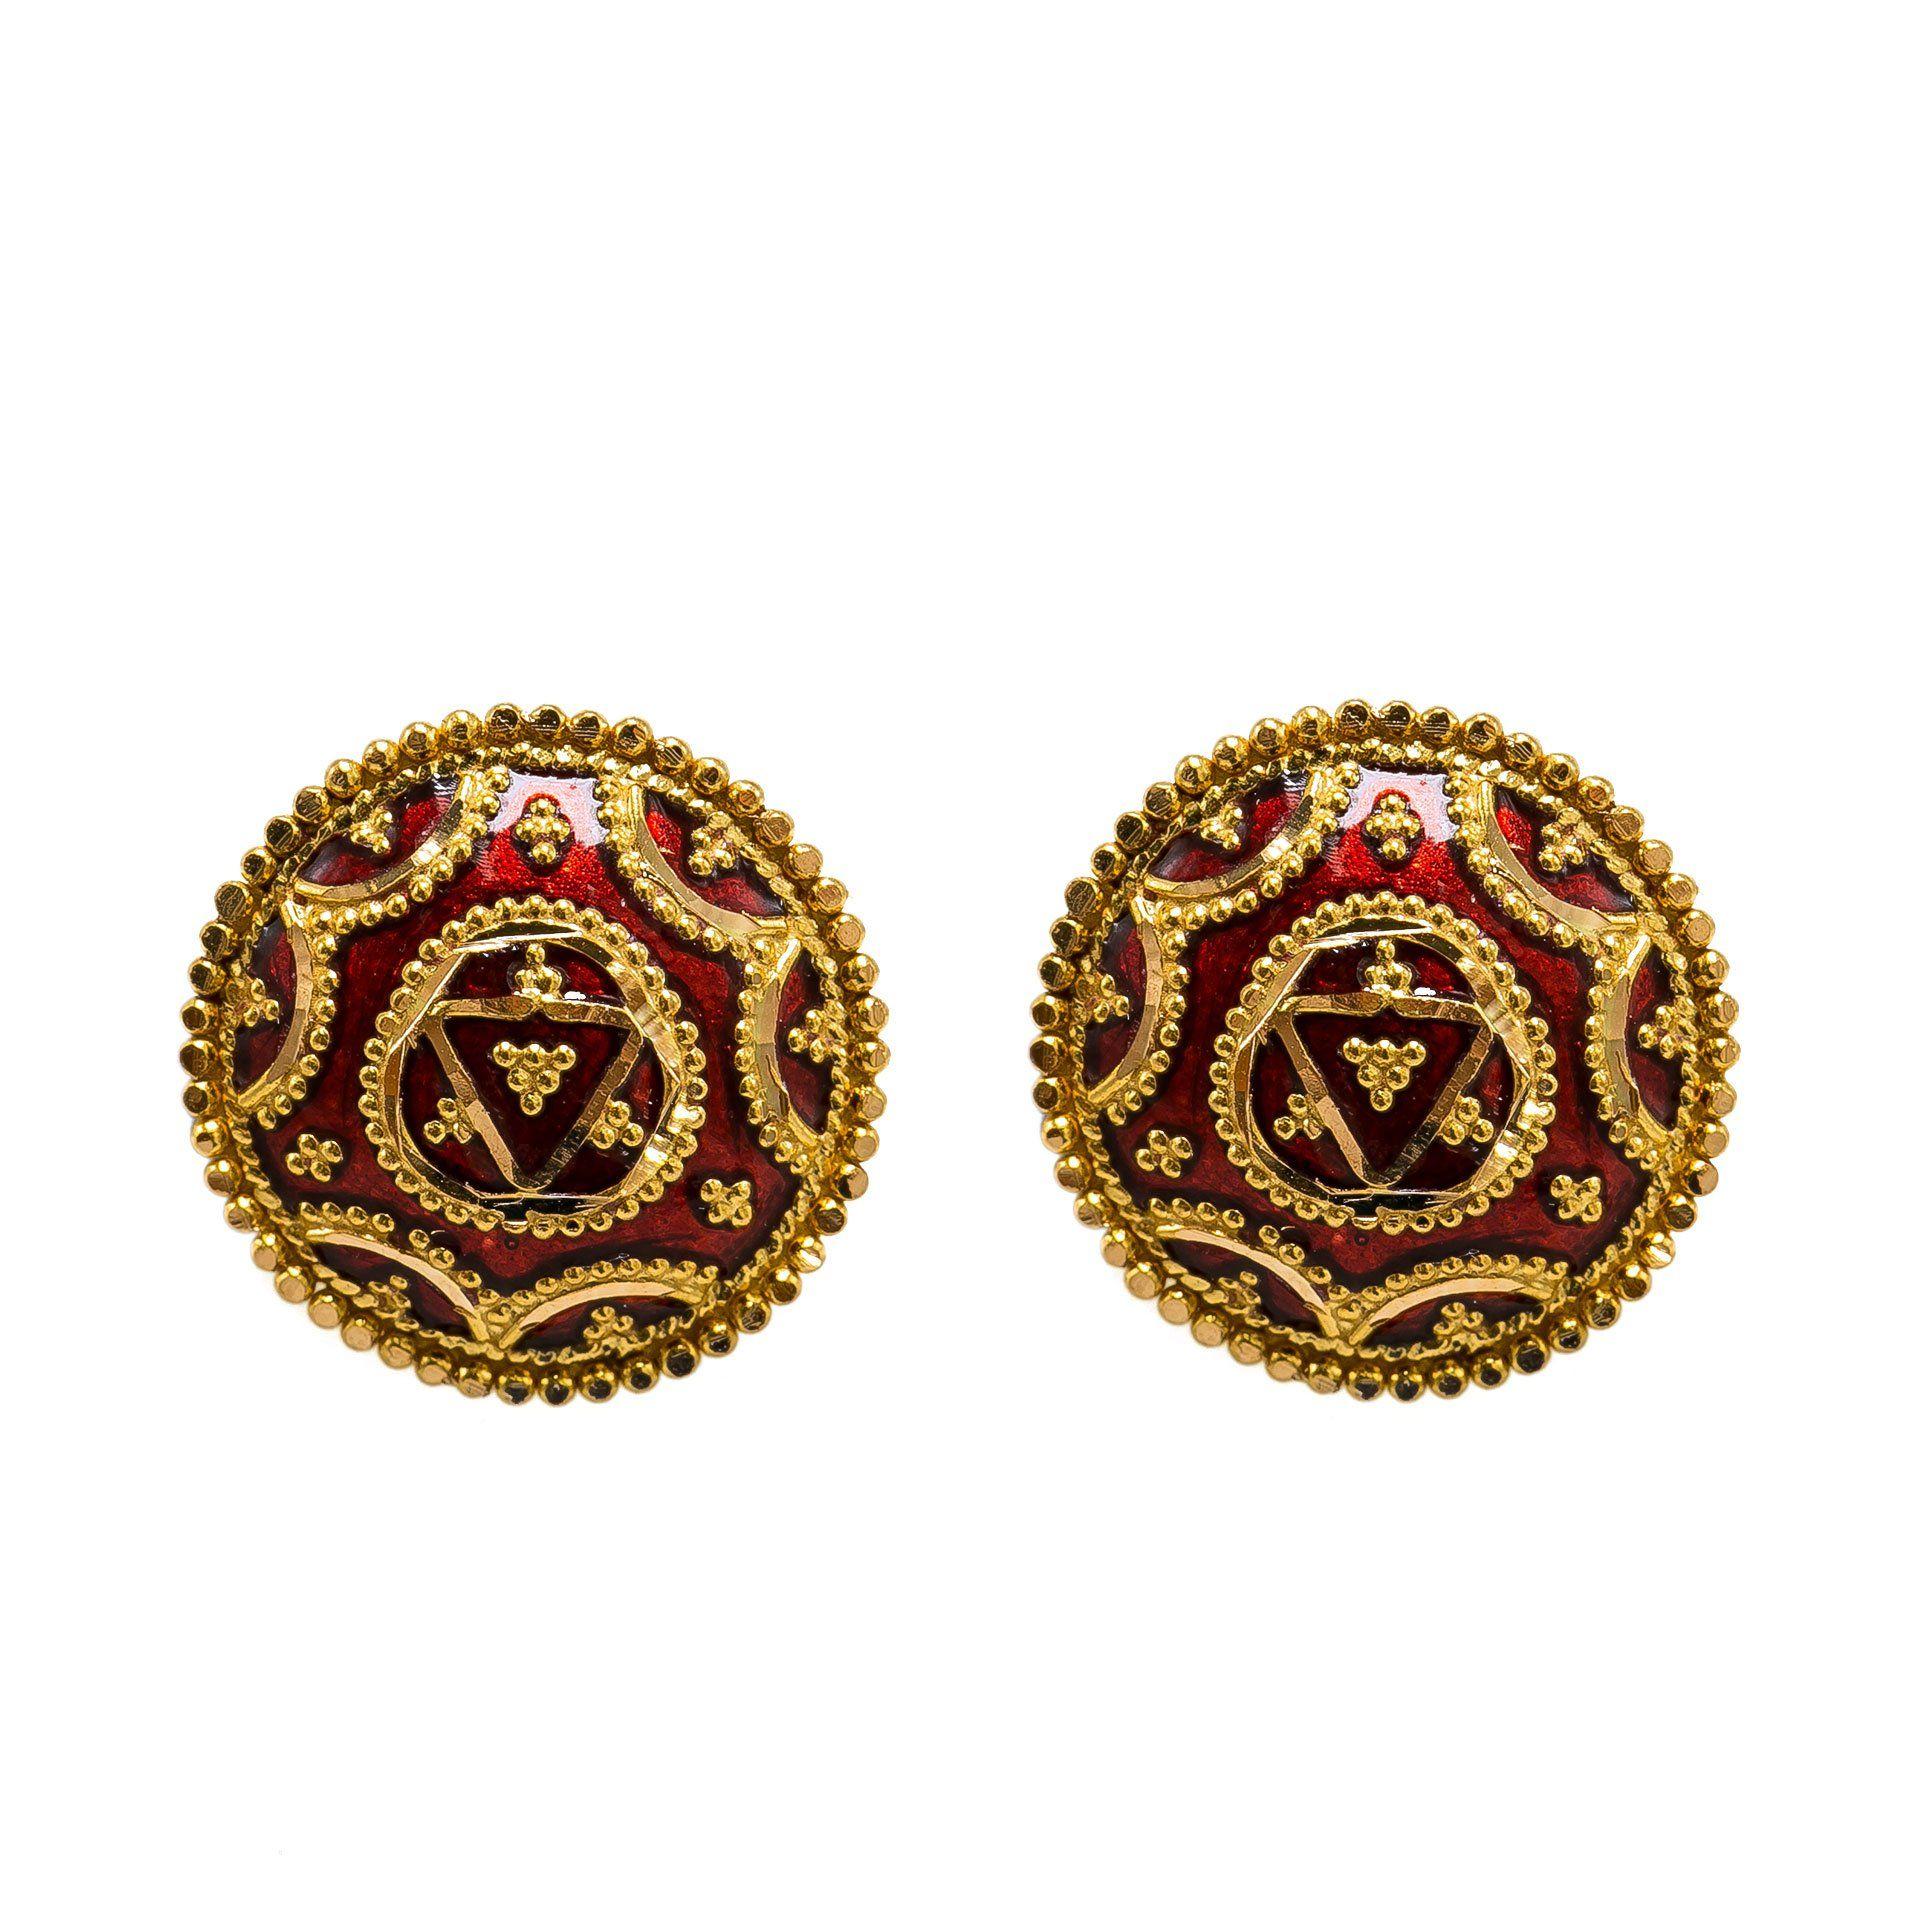 Painted Red V Logo - 22K Yellow Gold Stud Earrings W/ Red Hand Painted Finish & Royal